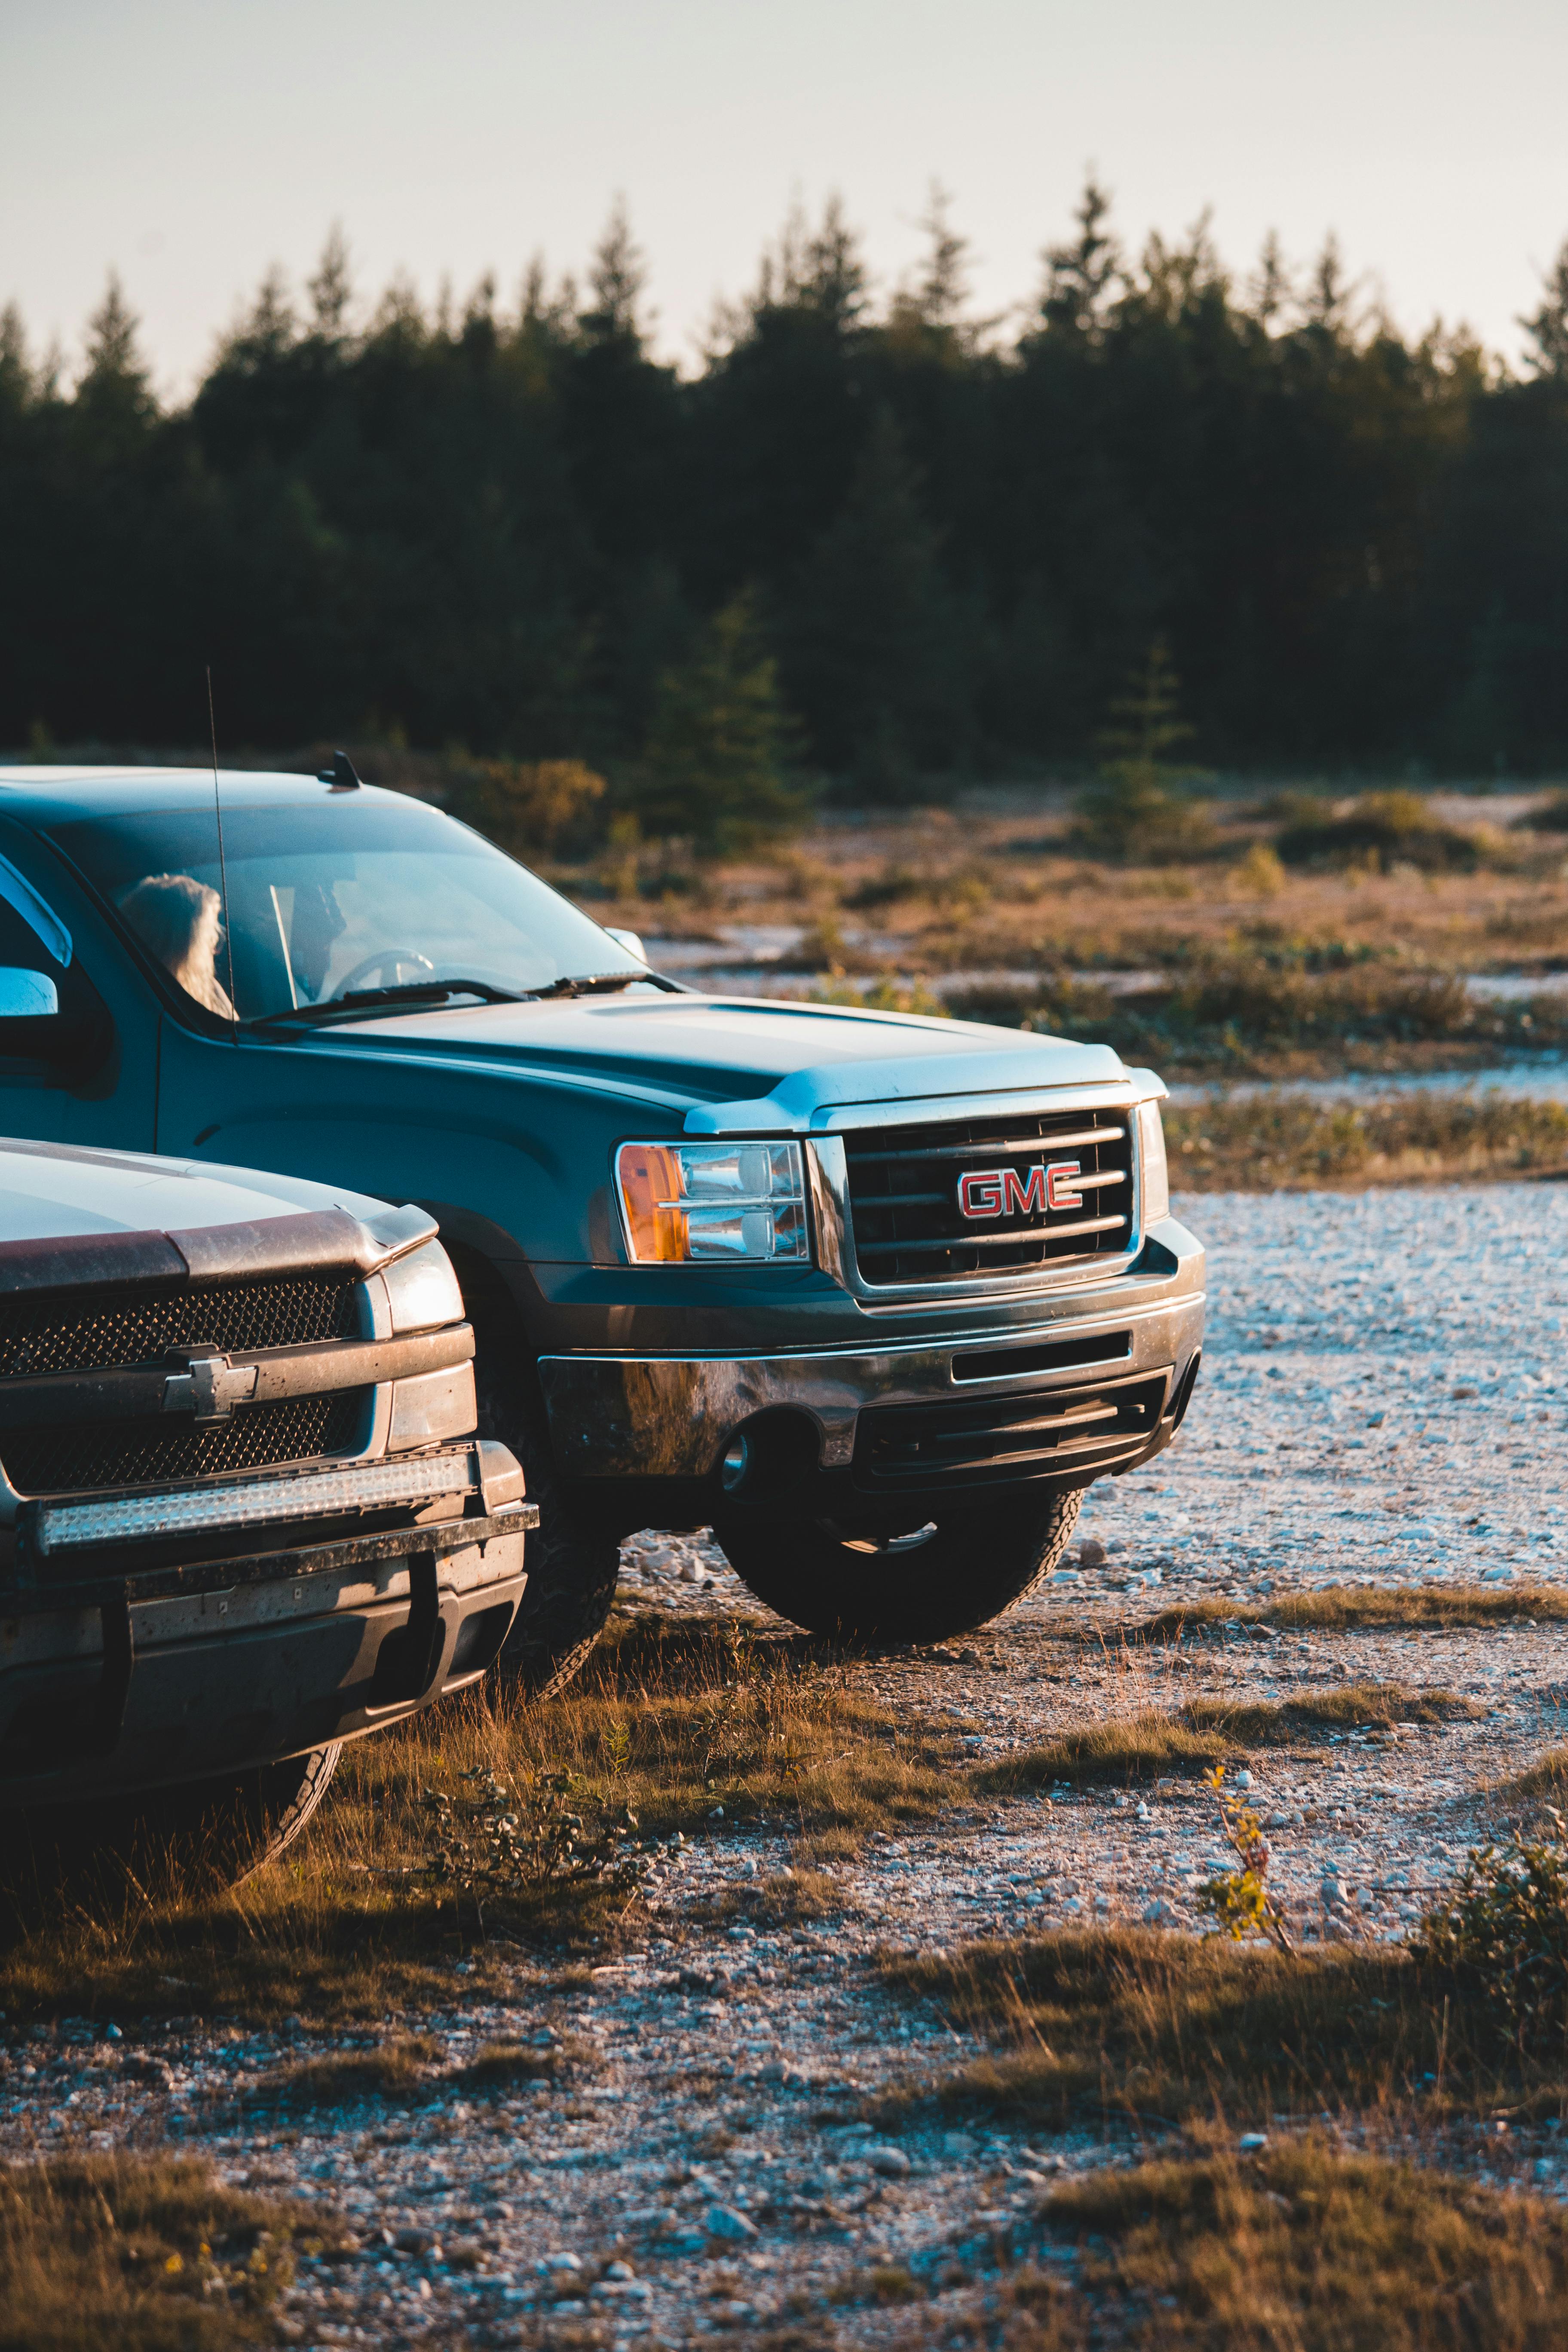 Gmc Photos, Download The BEST Free Gmc Stock Photos & HD Images